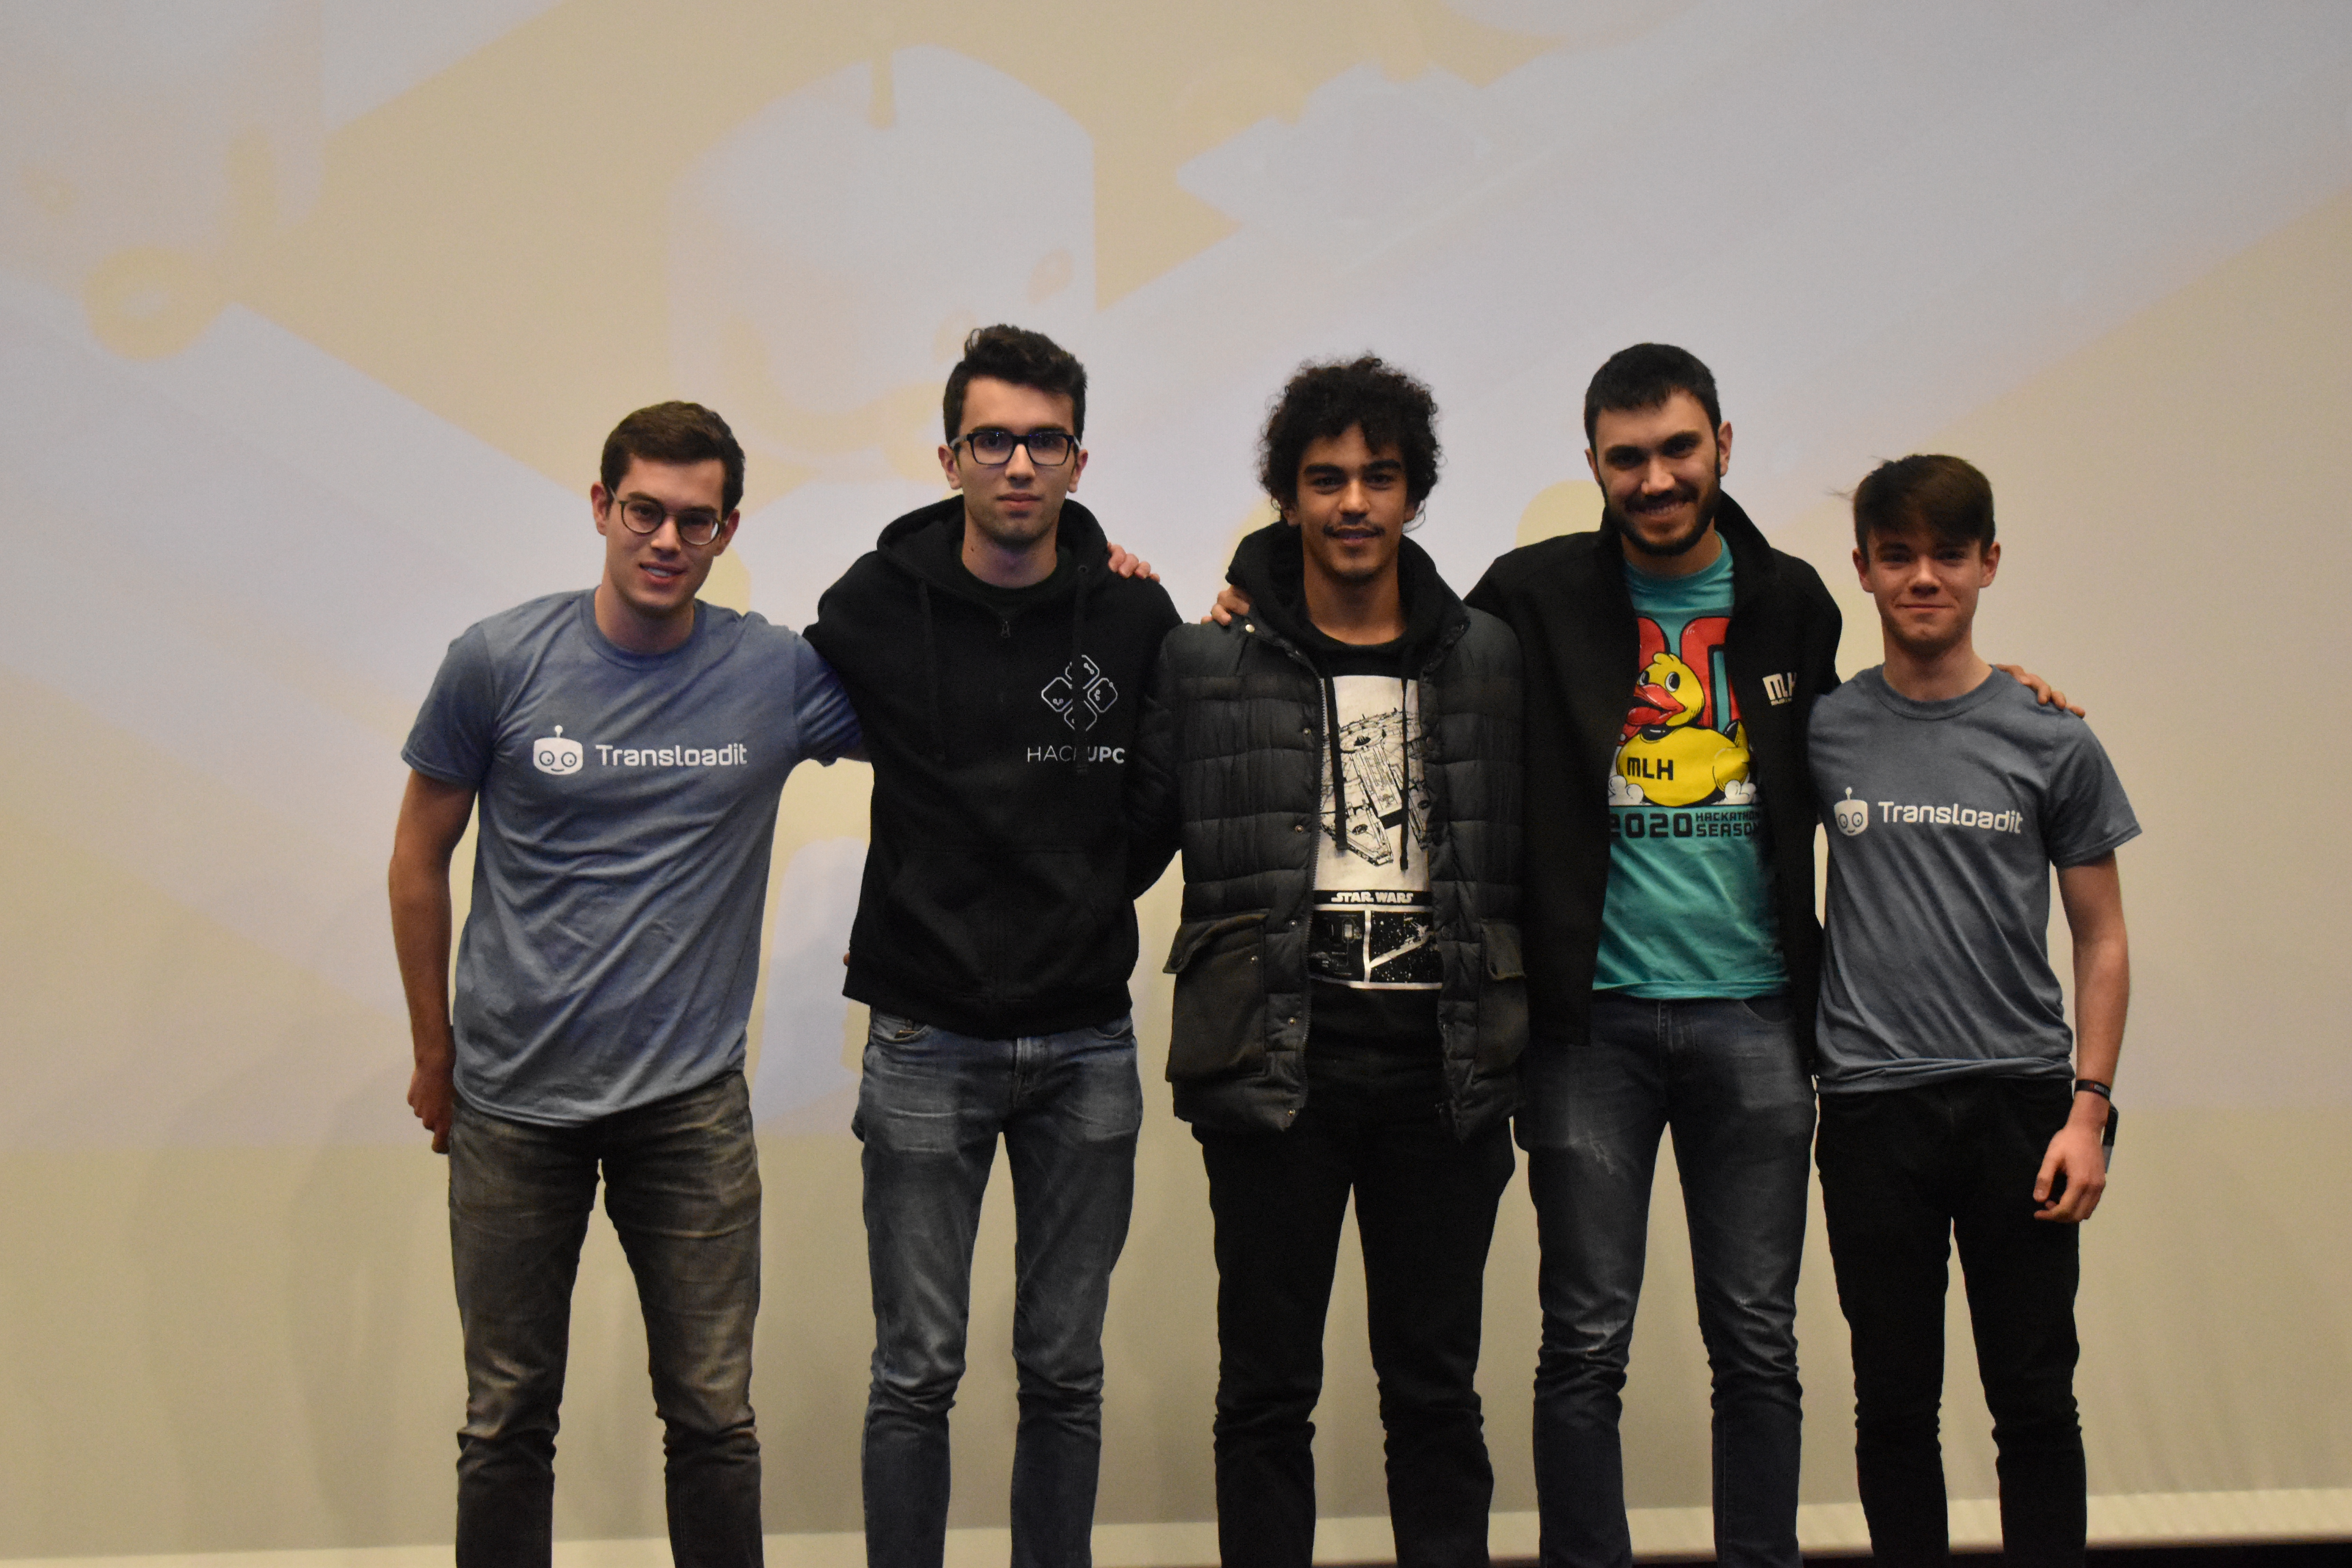 A photo of the contest winners with Marius and Charlie